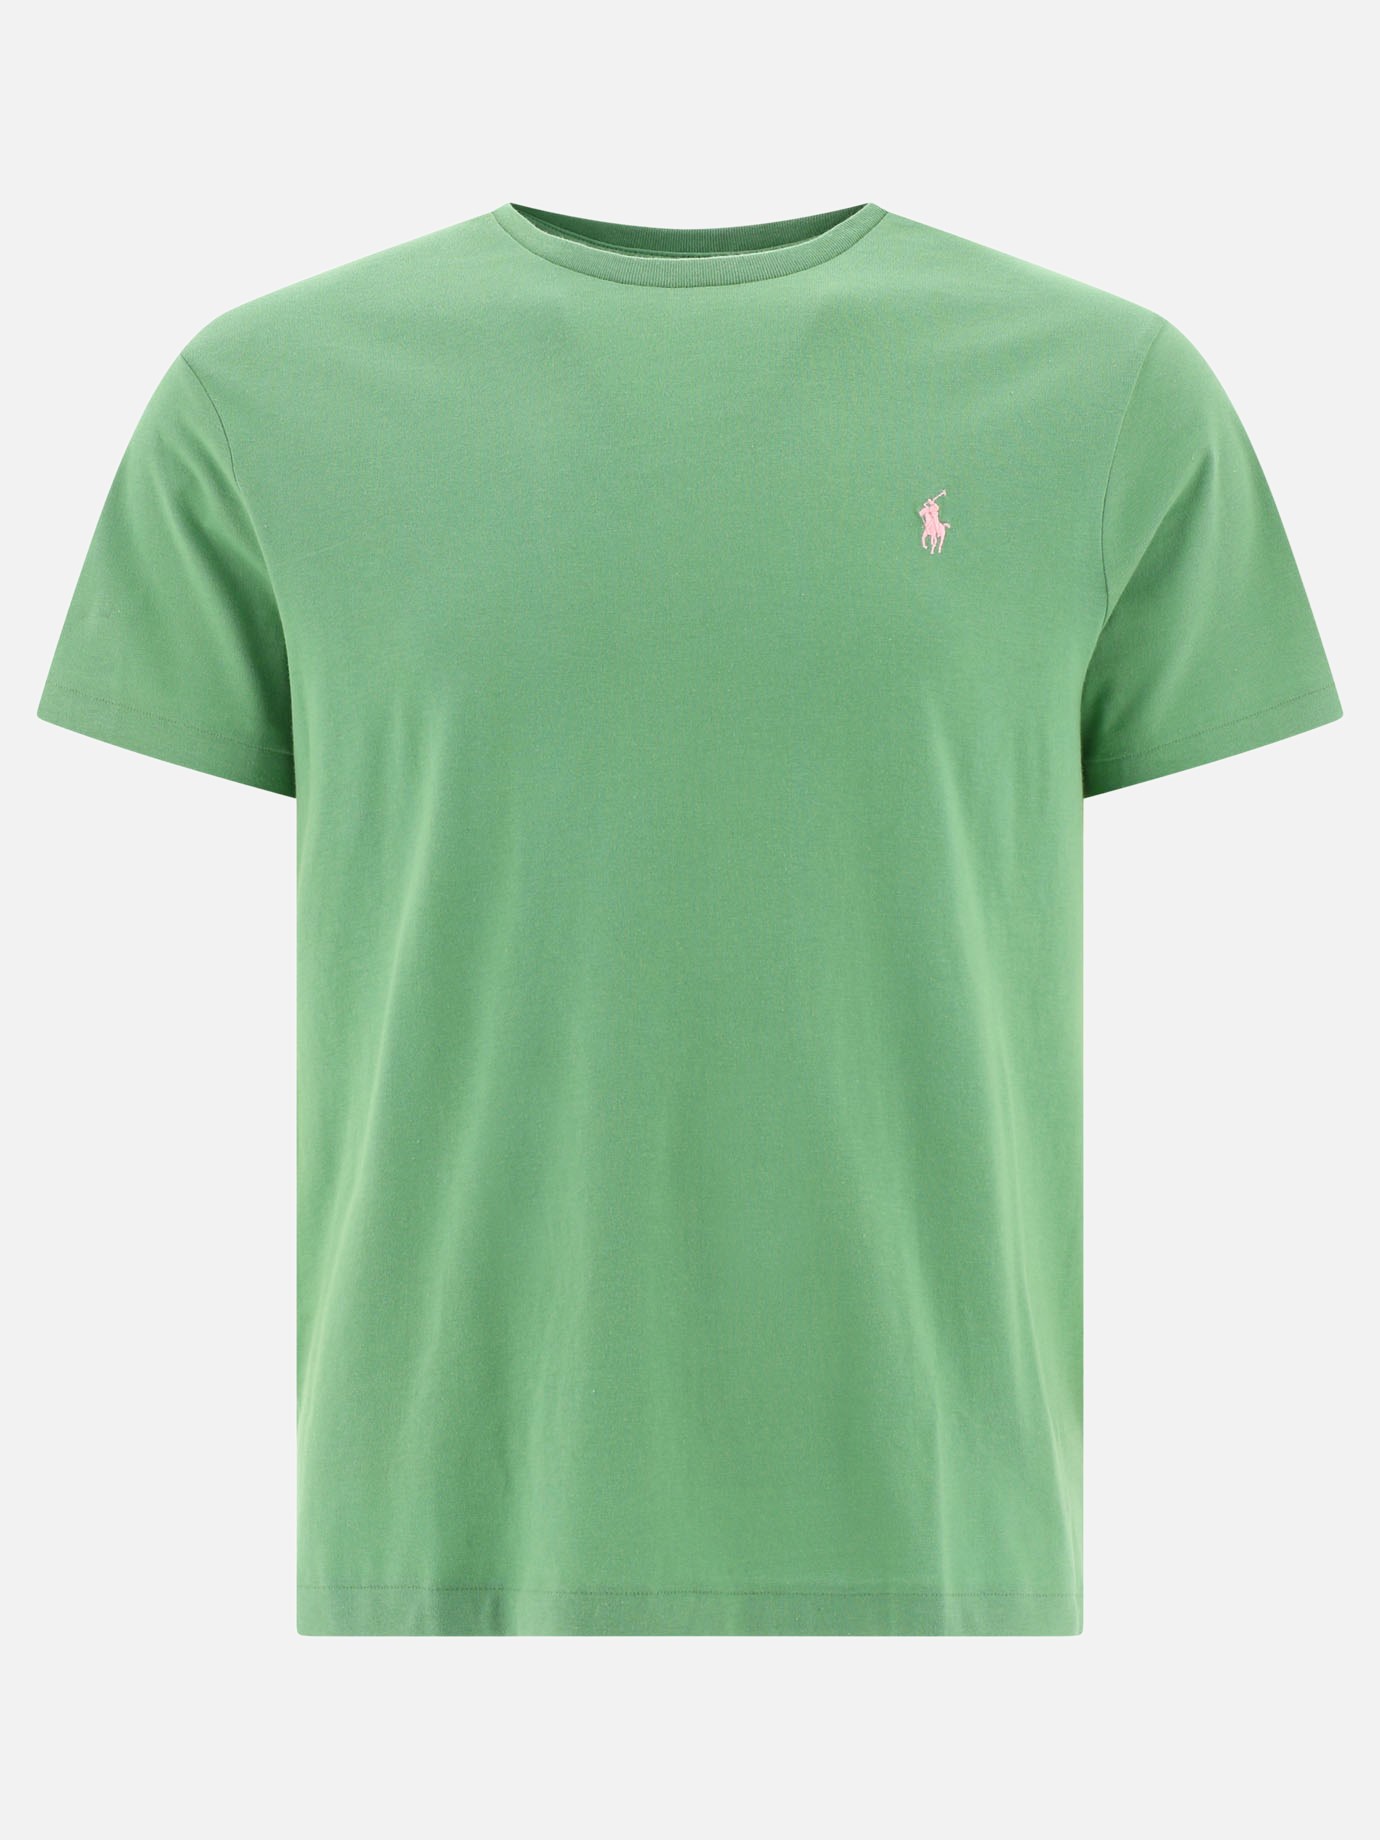 T-shirt  Pony  by Polo Ralph Lauren